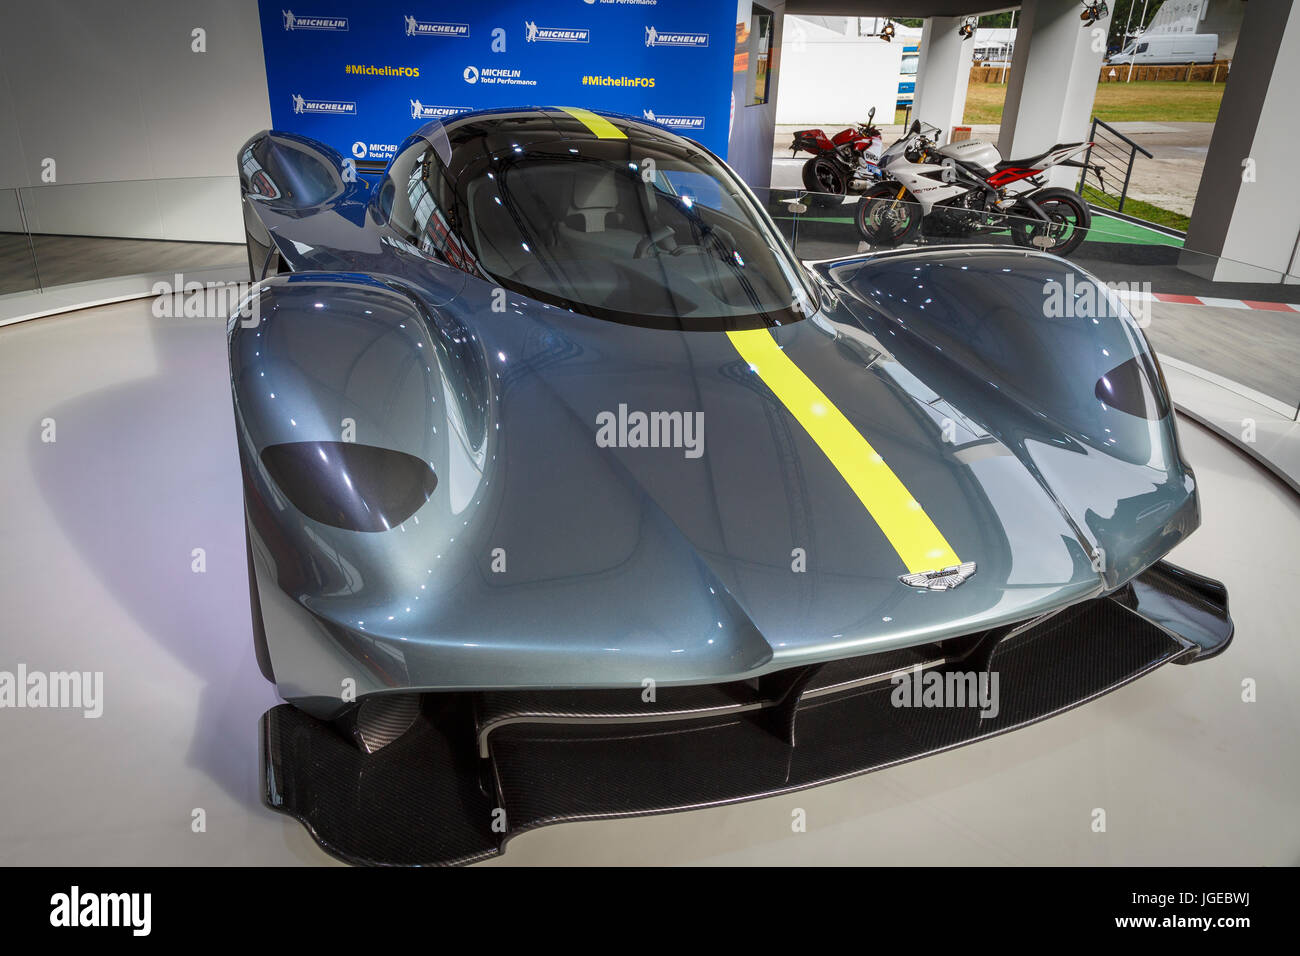 2017 Aston Martin Valkyrie on the Michelin display stand at the Goodwood Festival of Speed, Sussex, UK. Stock Photo